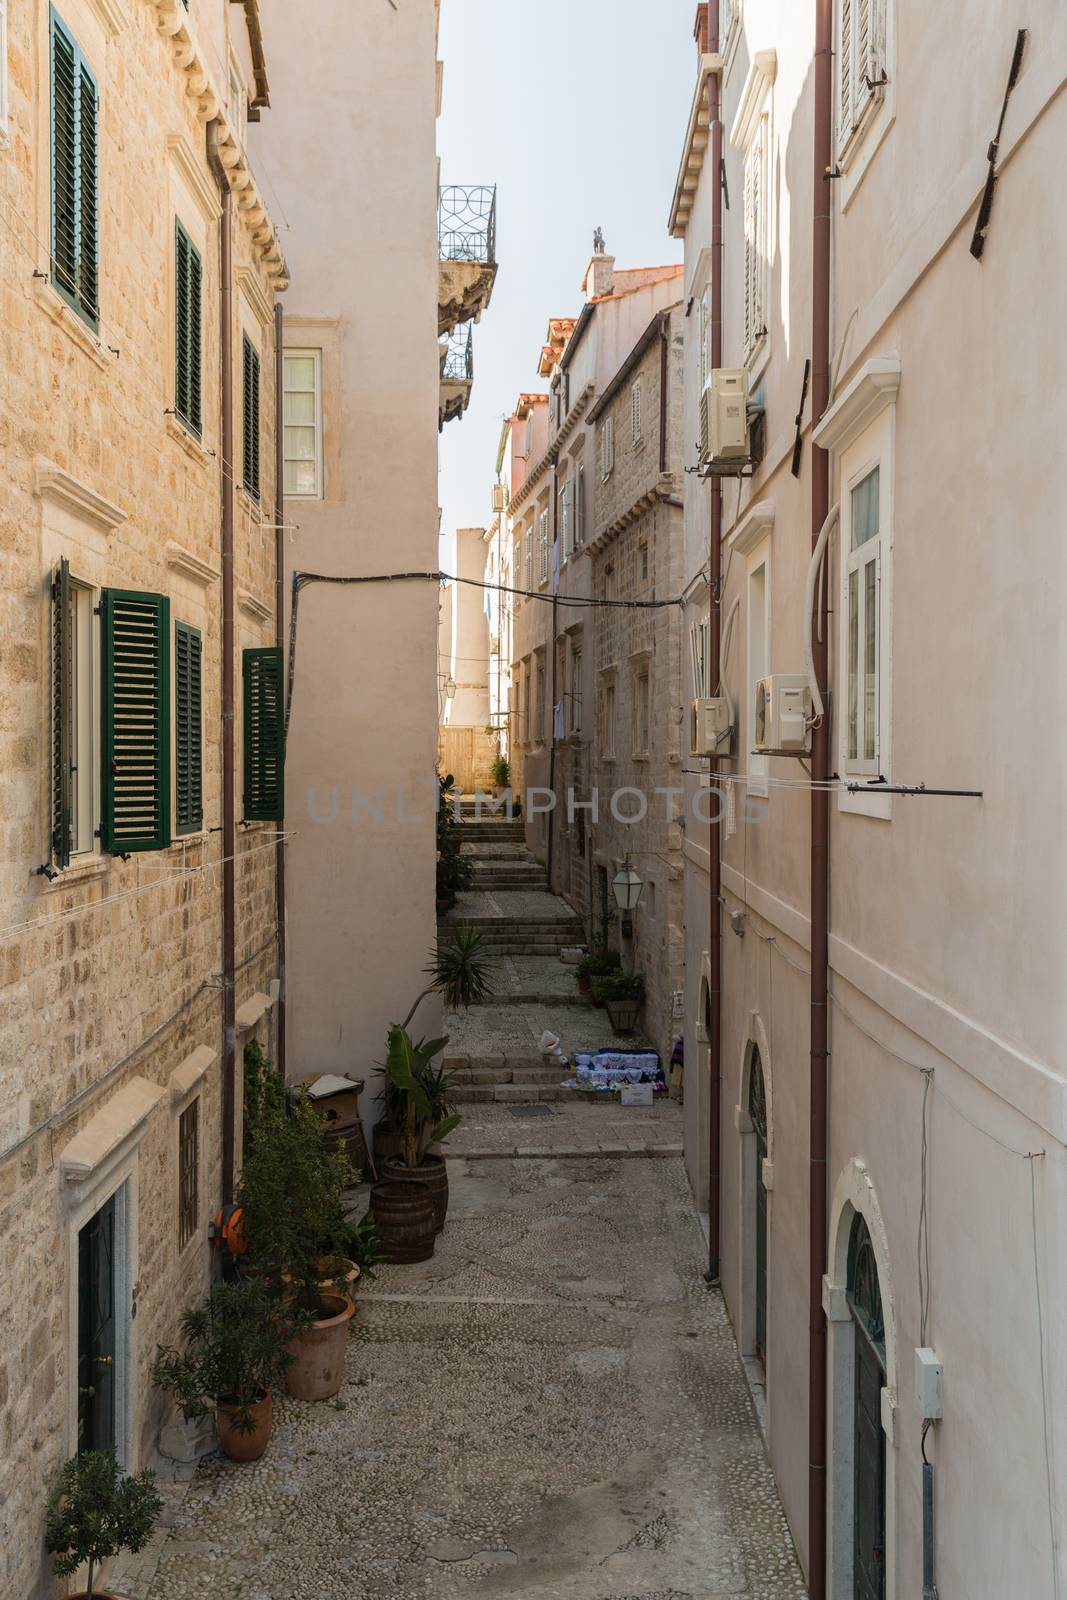 A side street and alley in Dubrovnik in Croatia by chrisukphoto